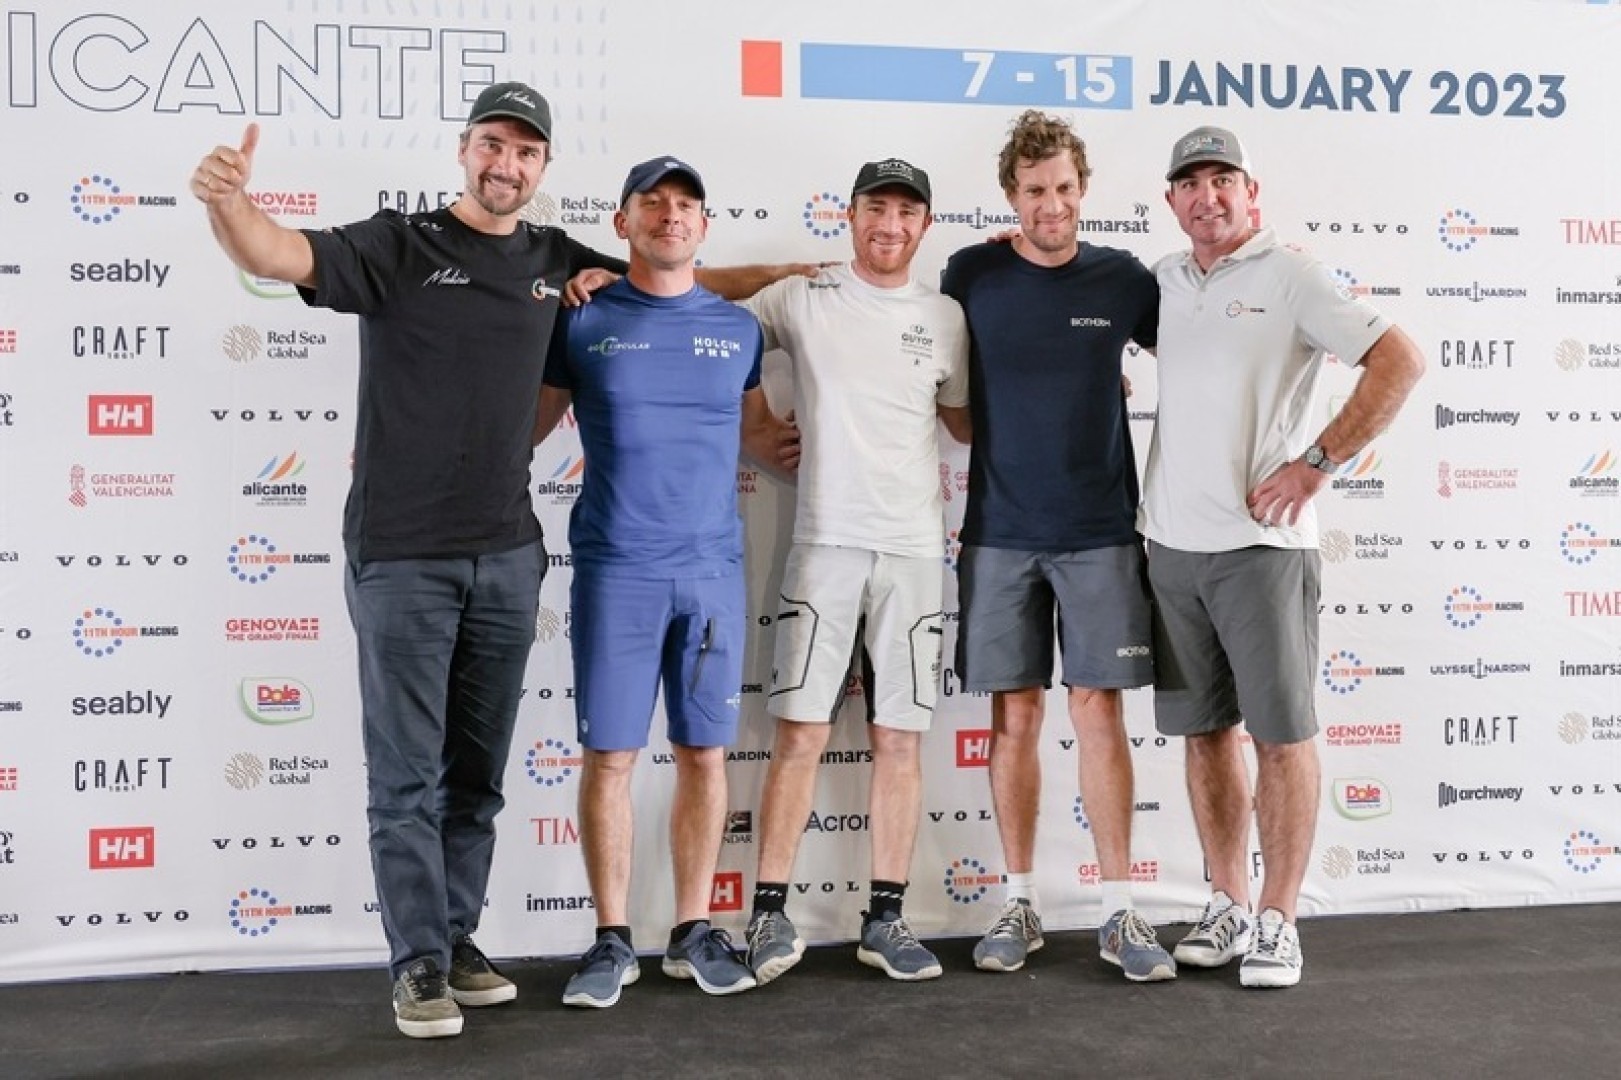 13 January 2023, IMOCA Skippers Press conference in Alicante: Boris Herrmann, Kevin Escoffier, Benjamin Dutreux, Paul Meilhat, Charlie Enright
© Sailing Energy / The Ocean Race